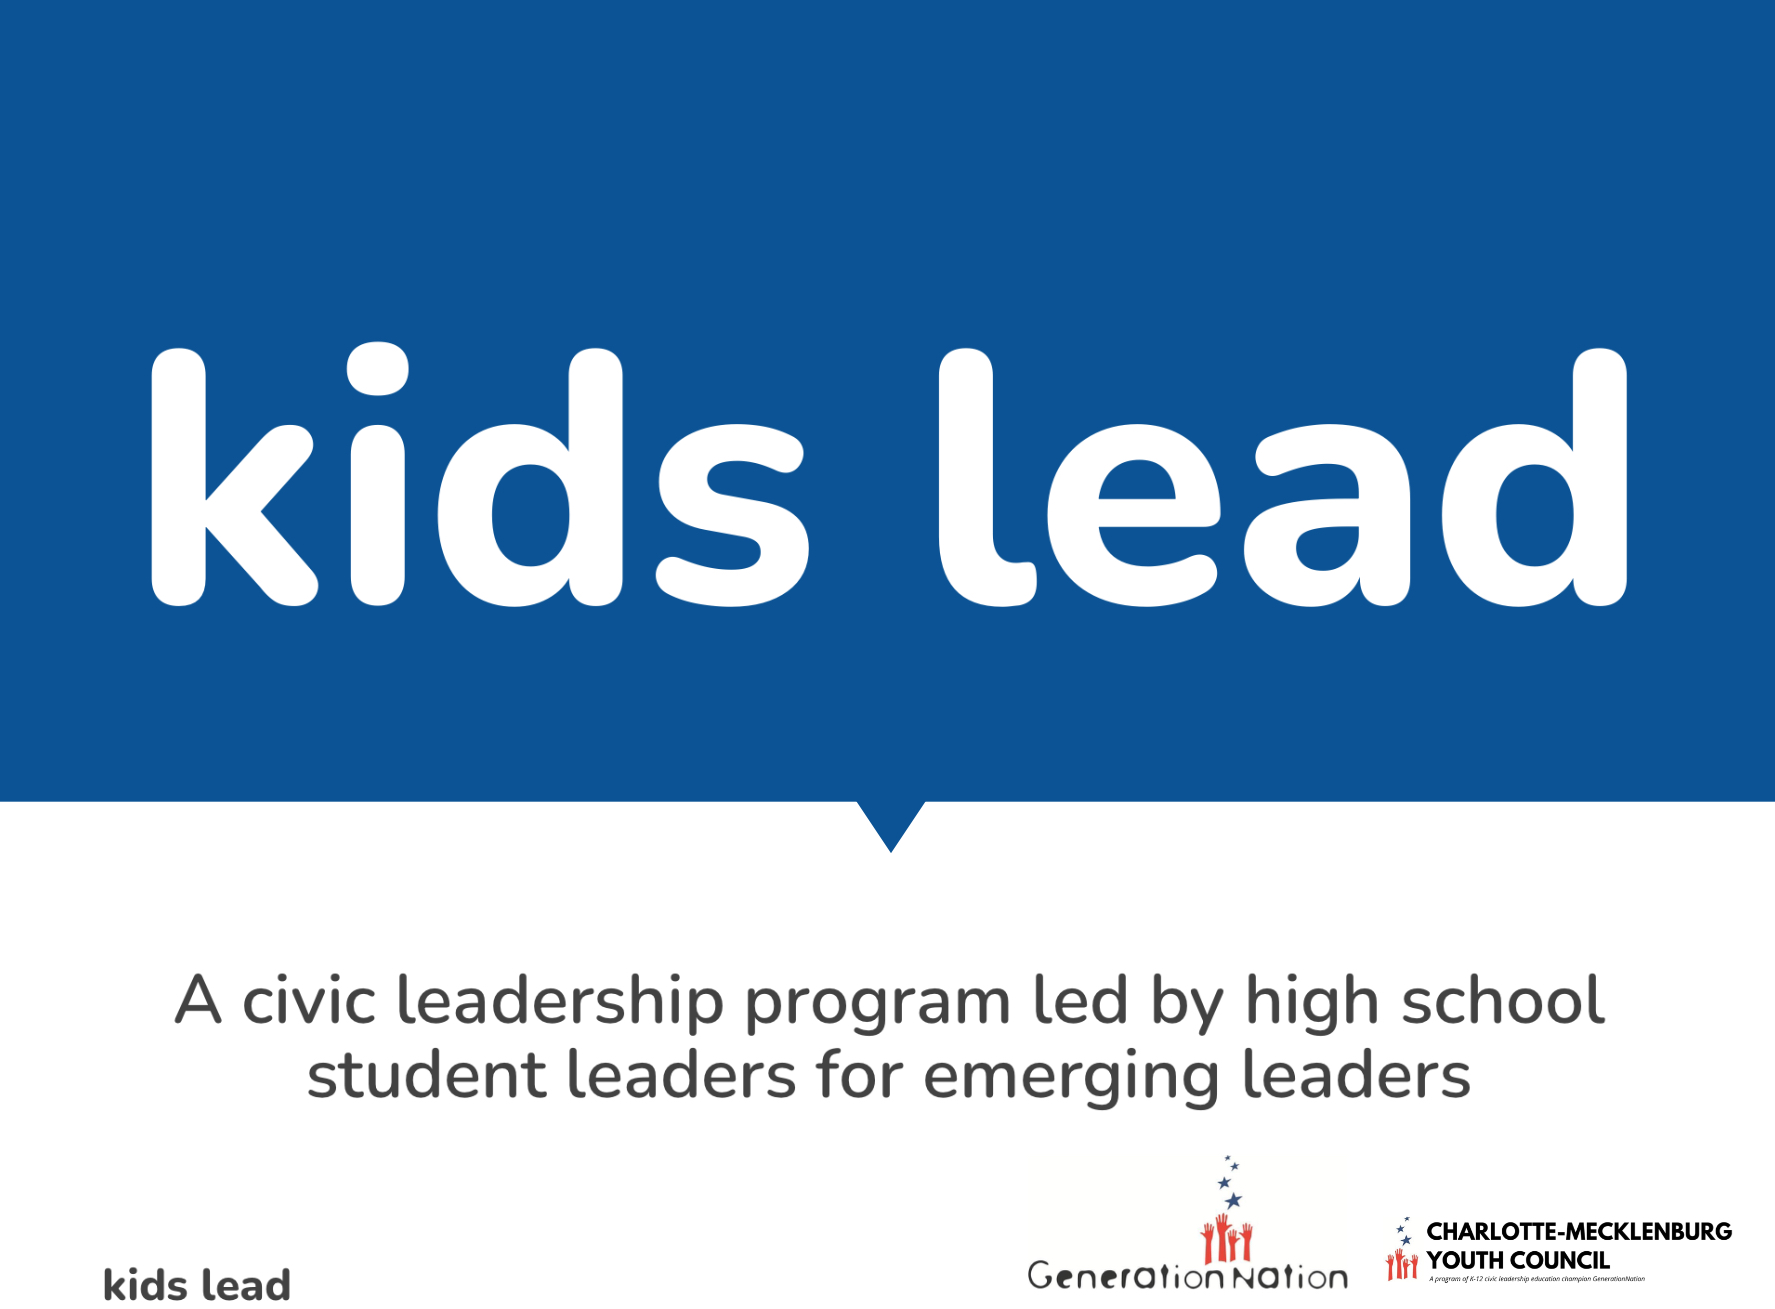 Kids Lead, a civic leadership program for middle schoolers